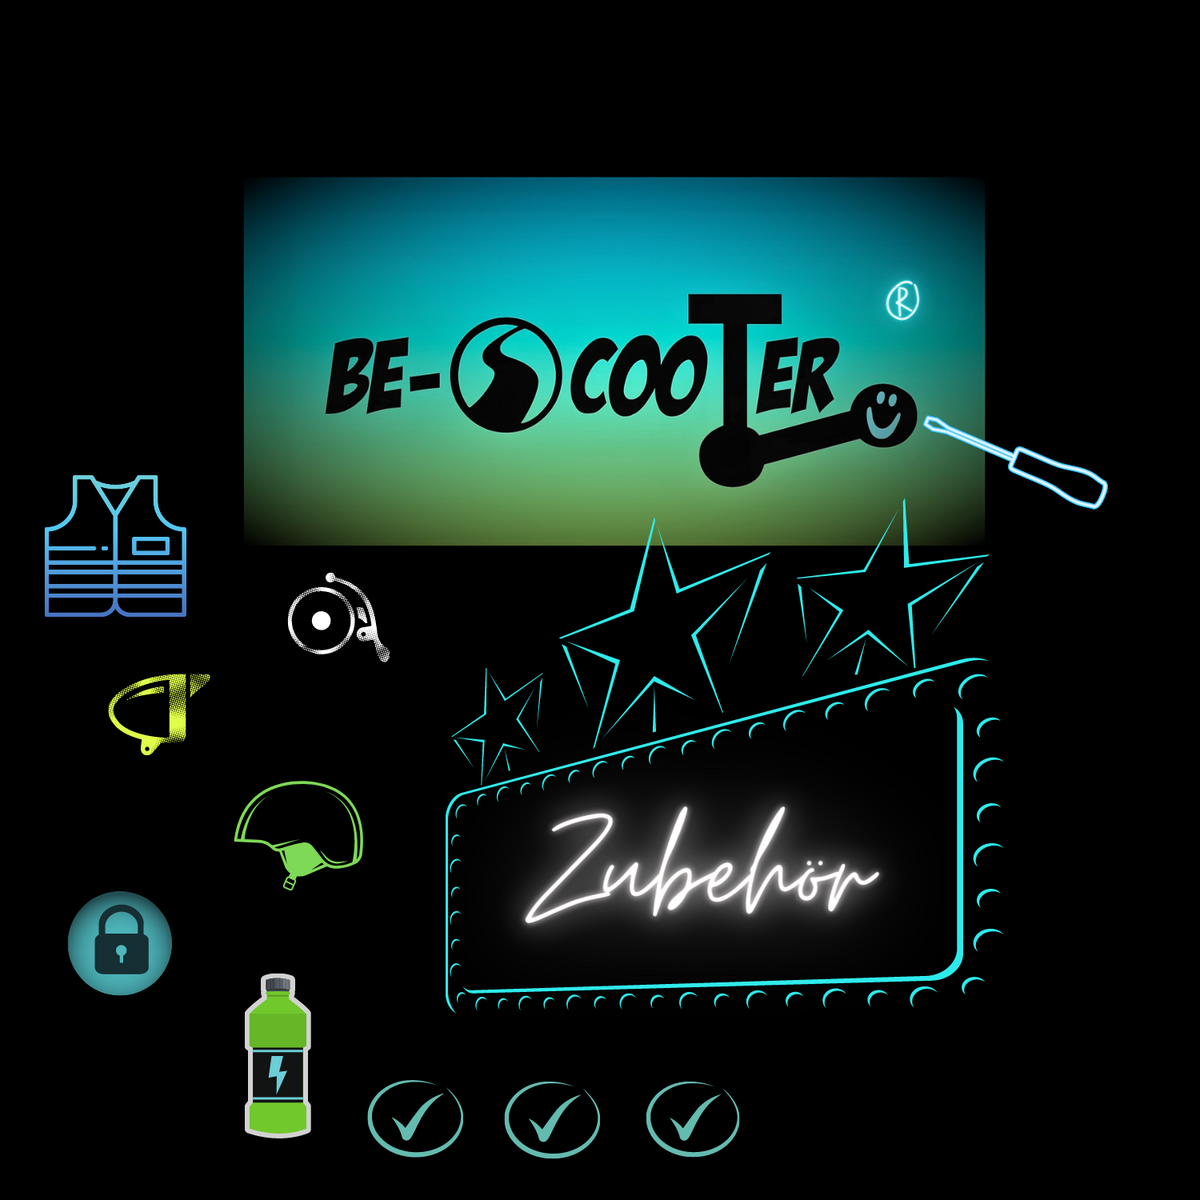 E-SCooTER ZUBEHÖR – BE-SCooTER® \